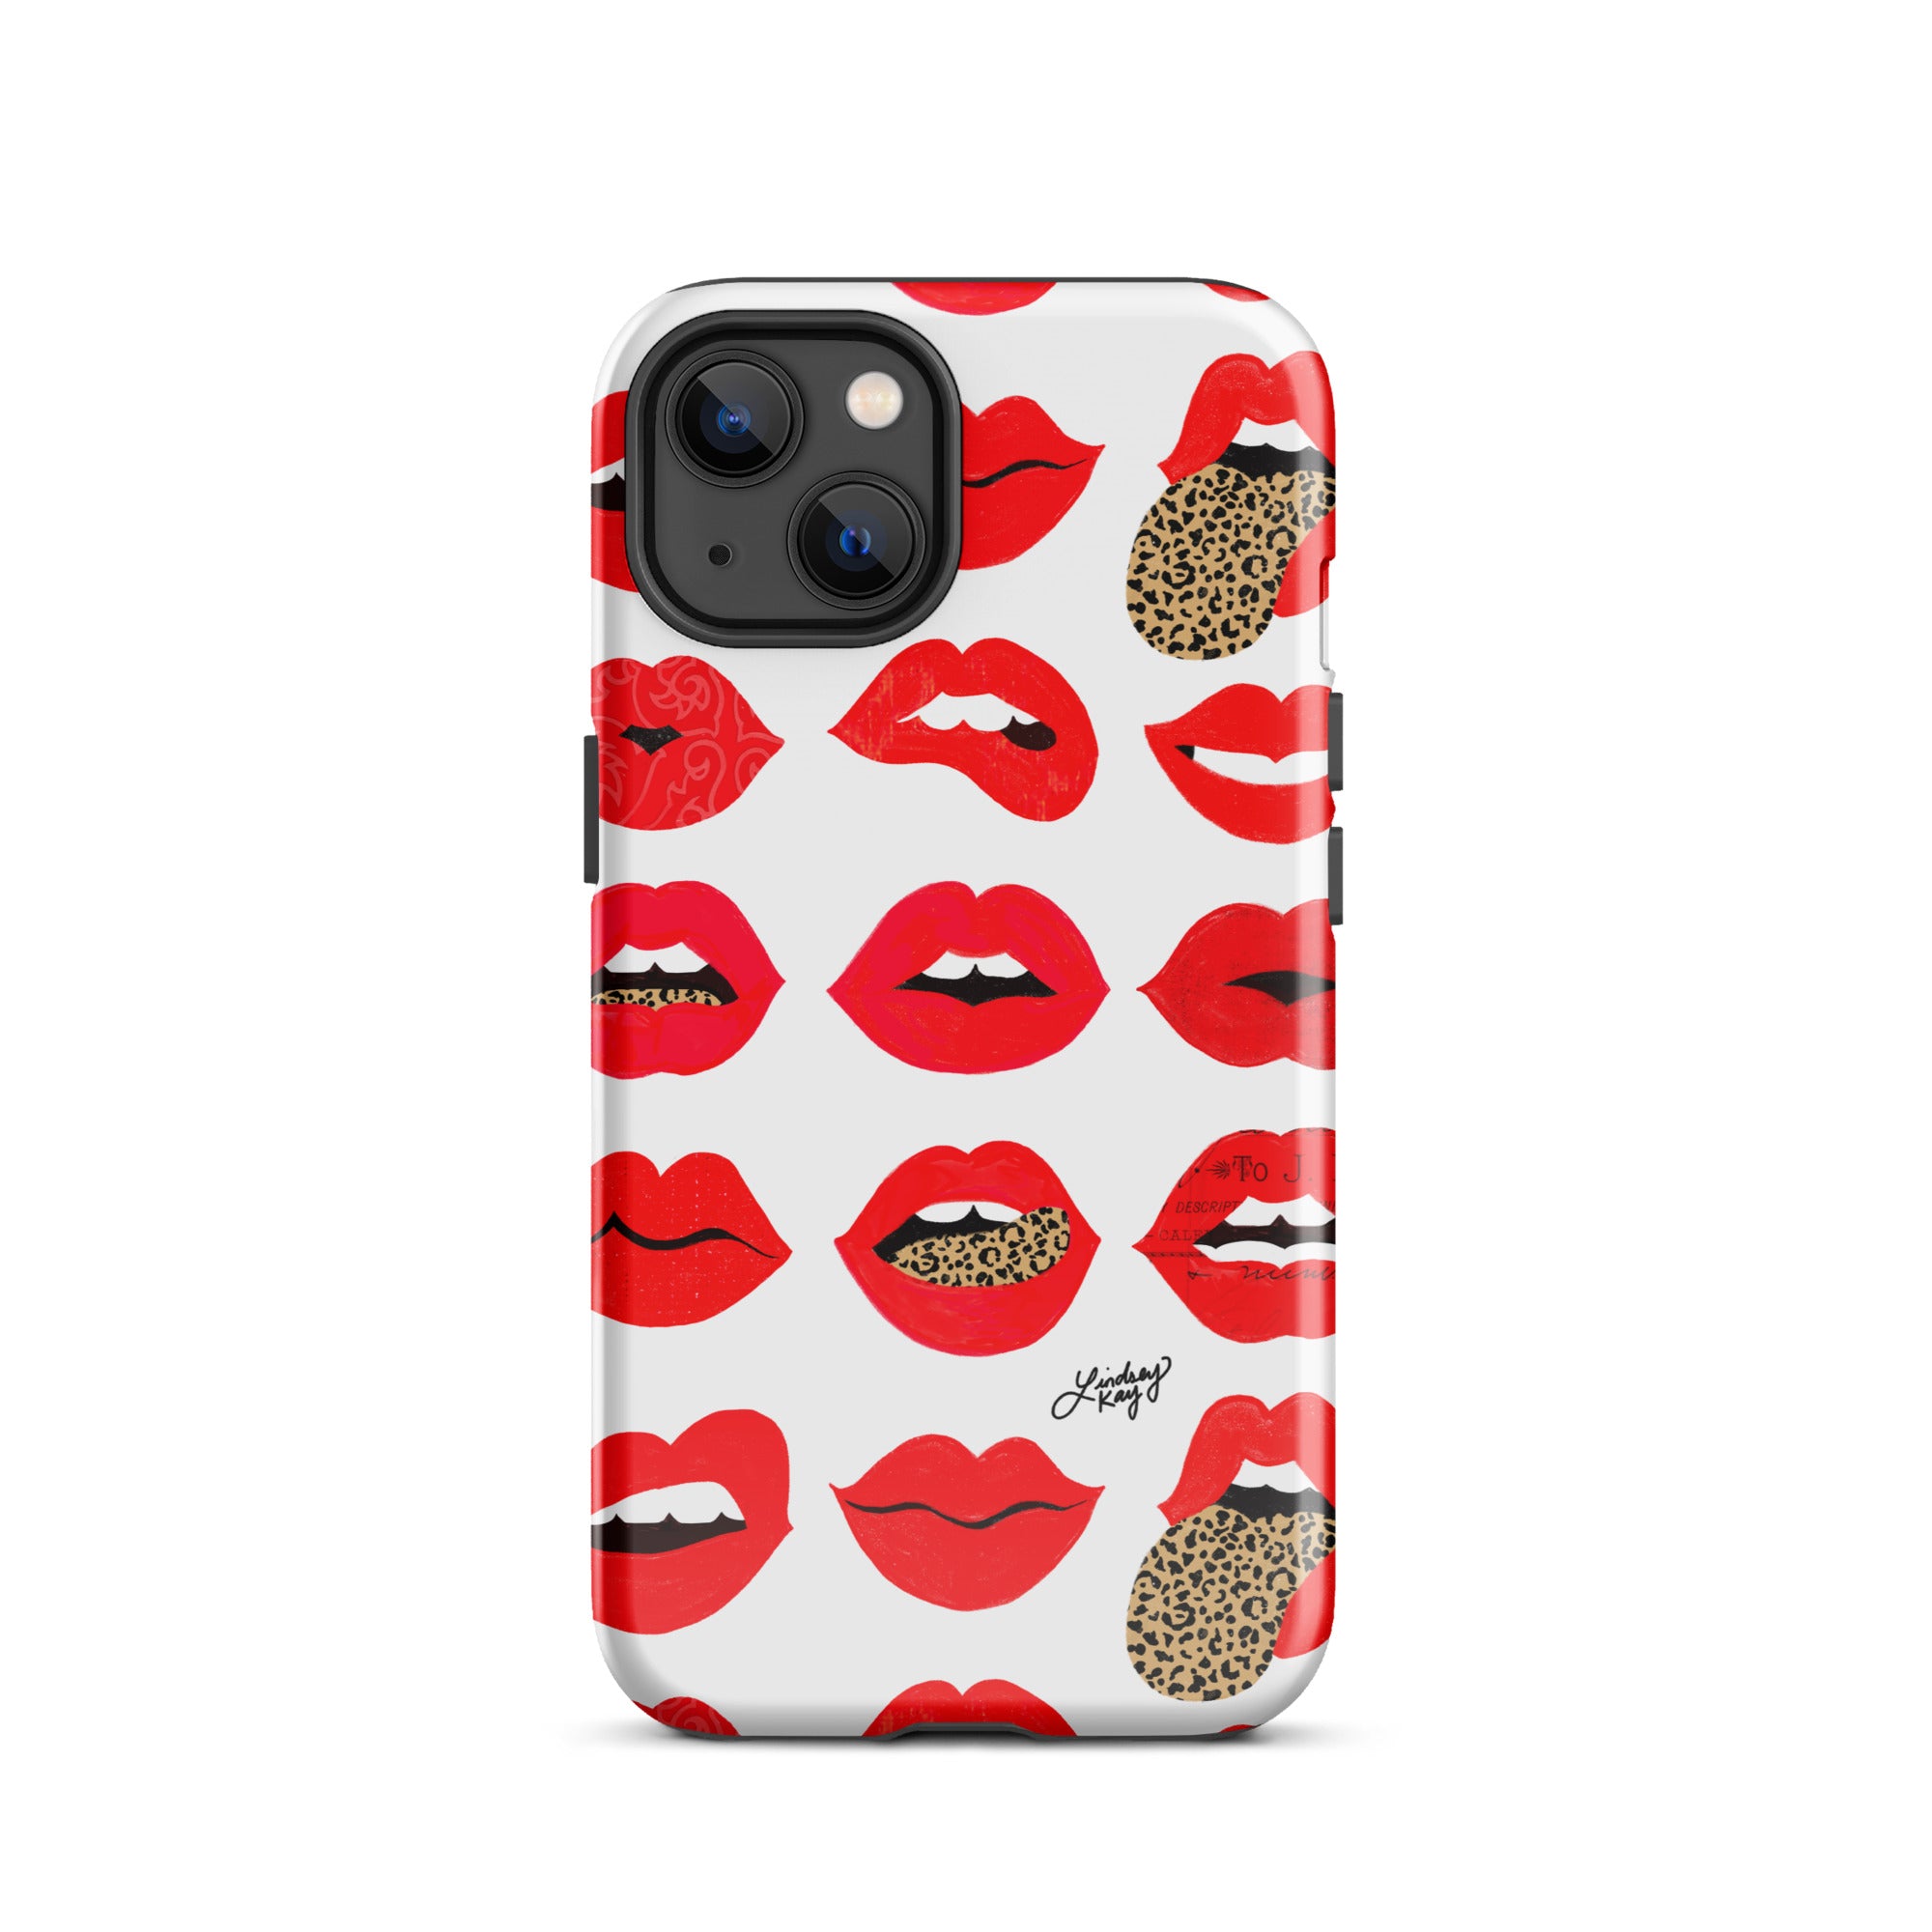 Leopard lips of love iphone 15 case red pattern leopard-print cover protector Lindsey Kay collective